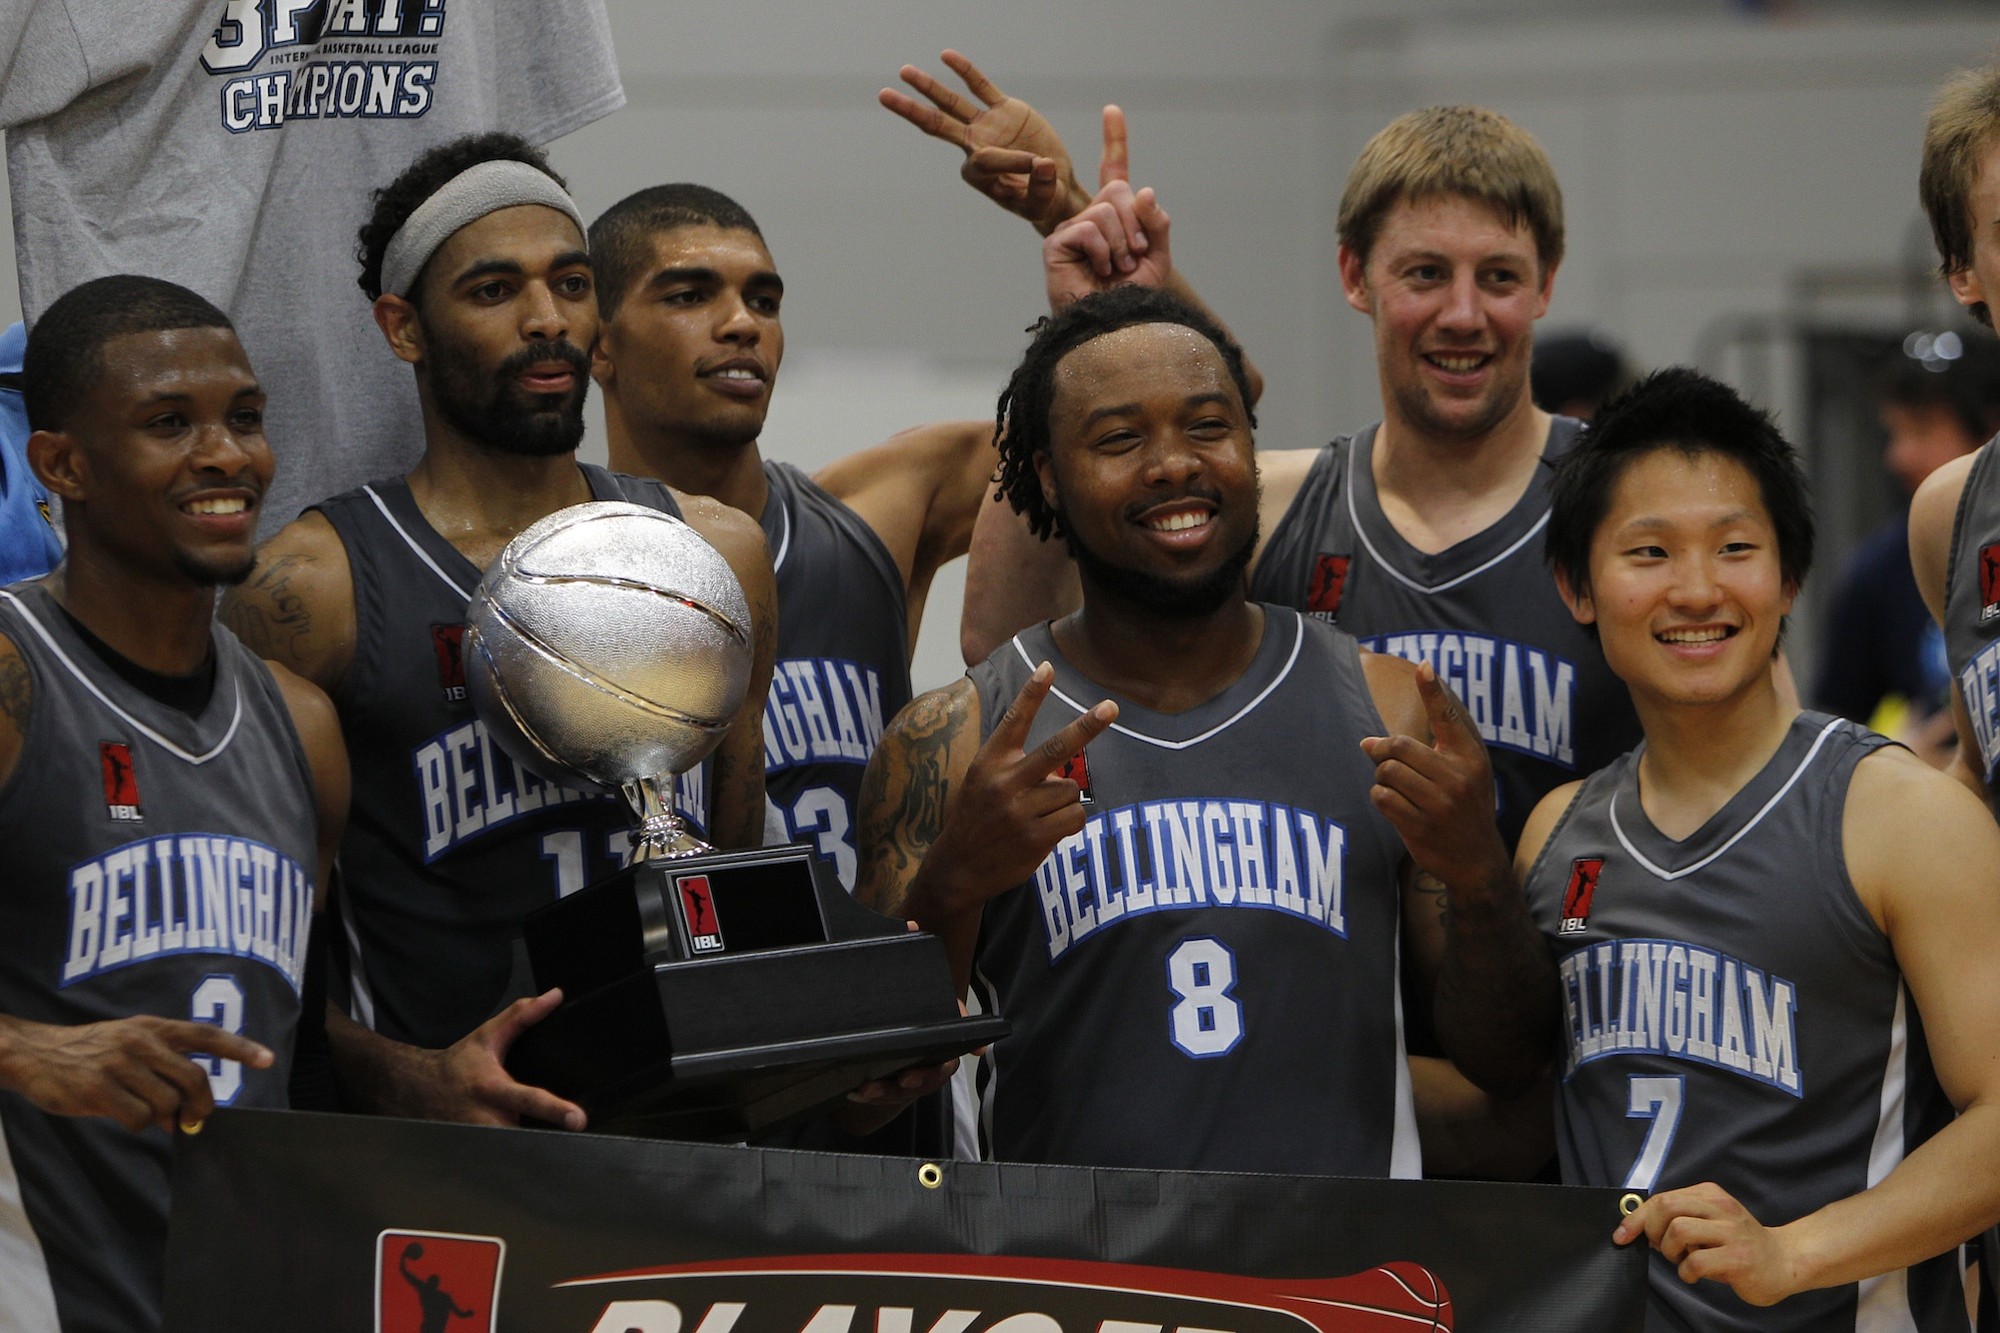 Bellingham Slam players celebrate after the IBL Championship game.(Steve Dipaola for the Columbian)